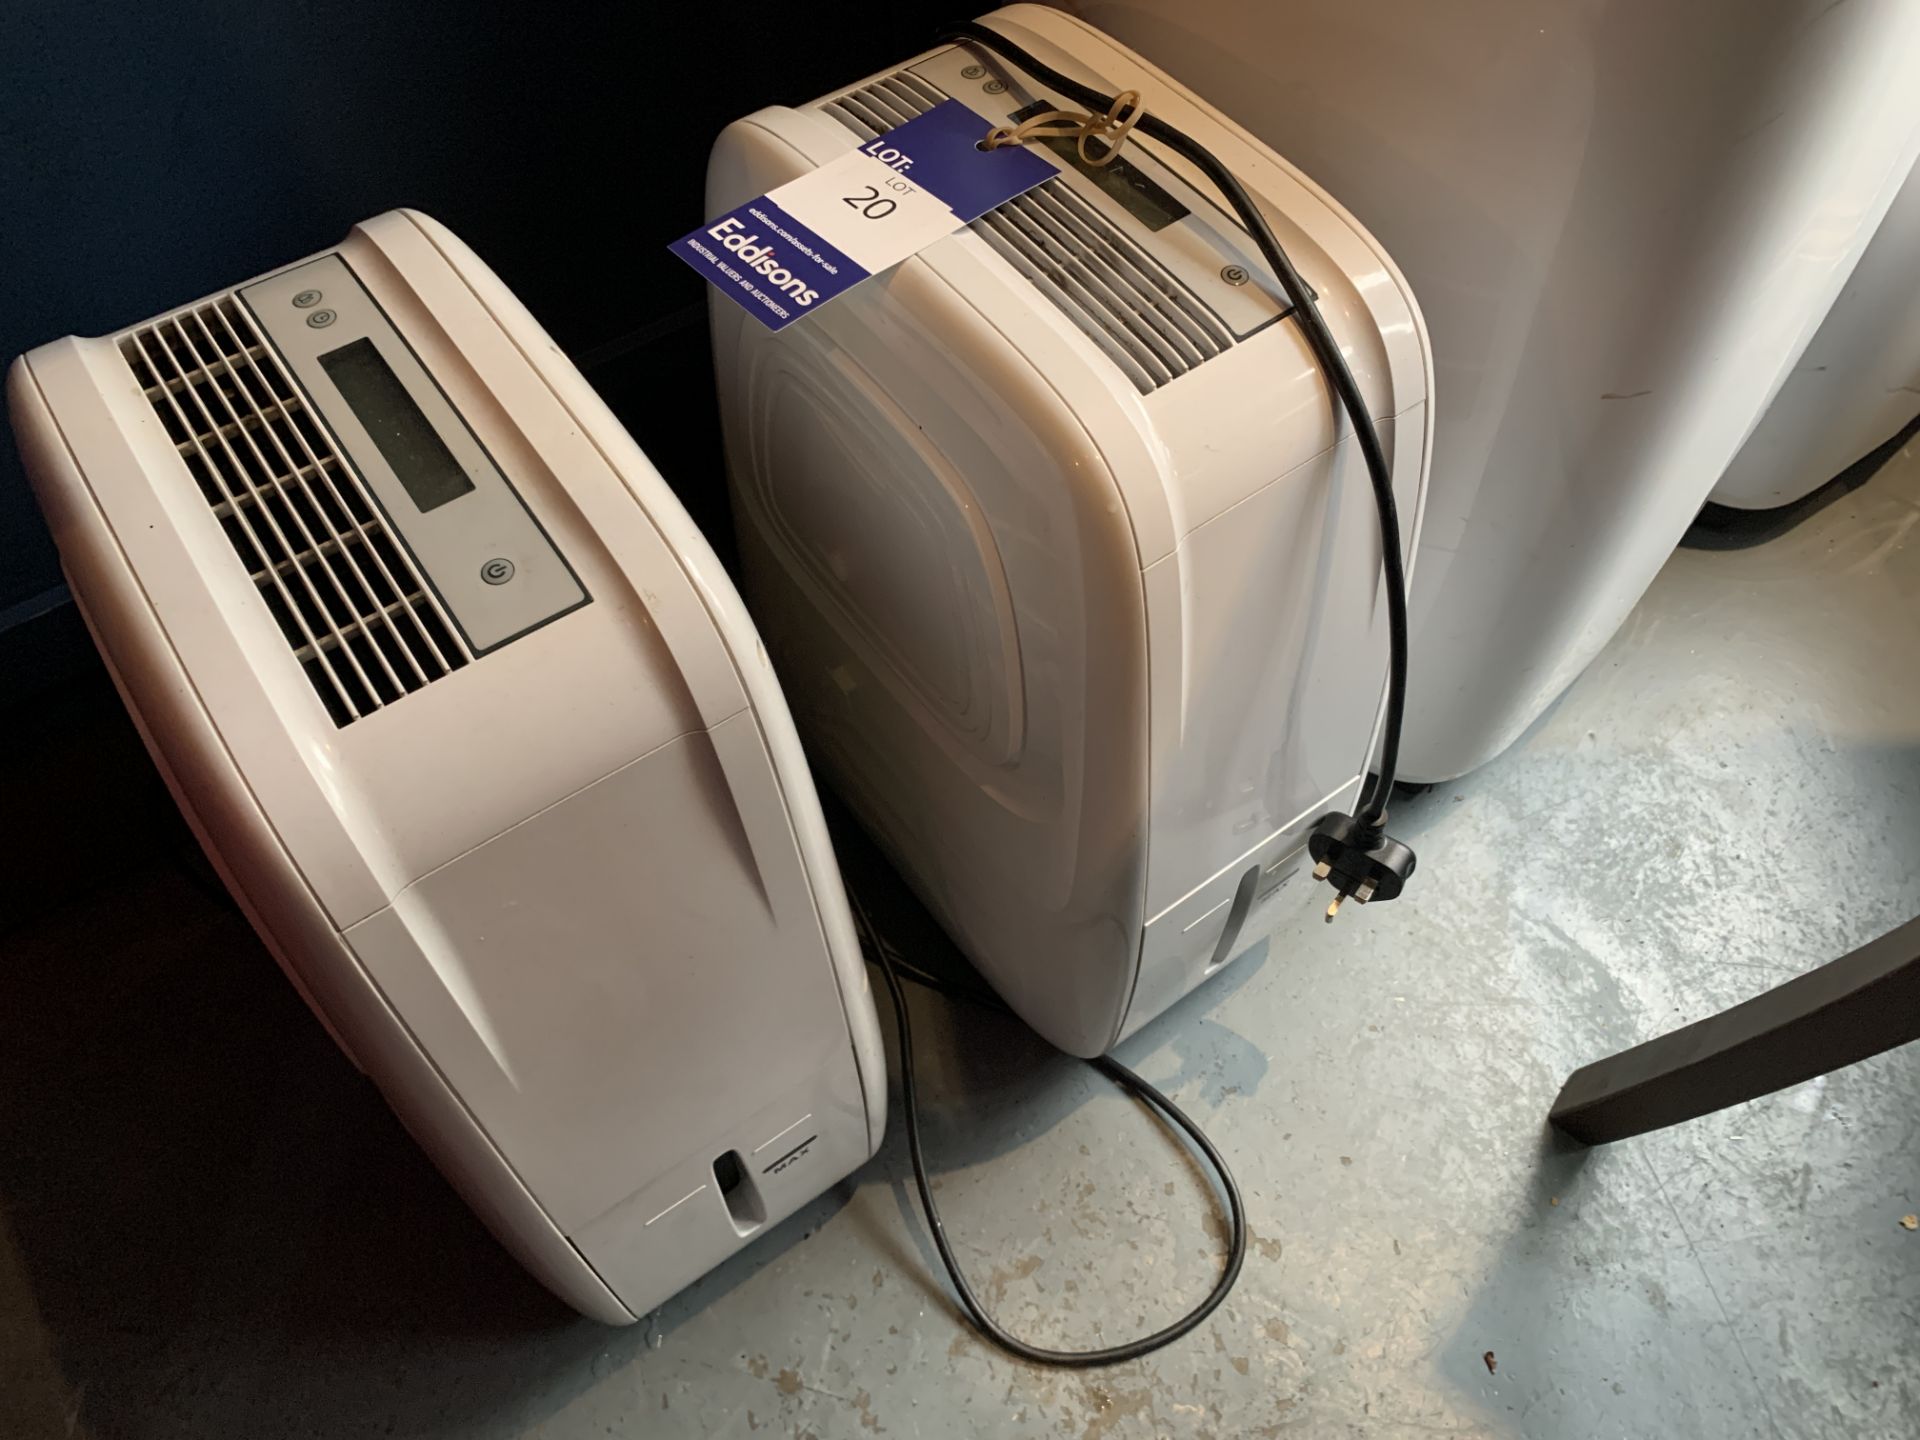 2x Princess Mobile Air Conditioning/Dehumidifying Units and 2x Other Aircon Units - Image 2 of 5